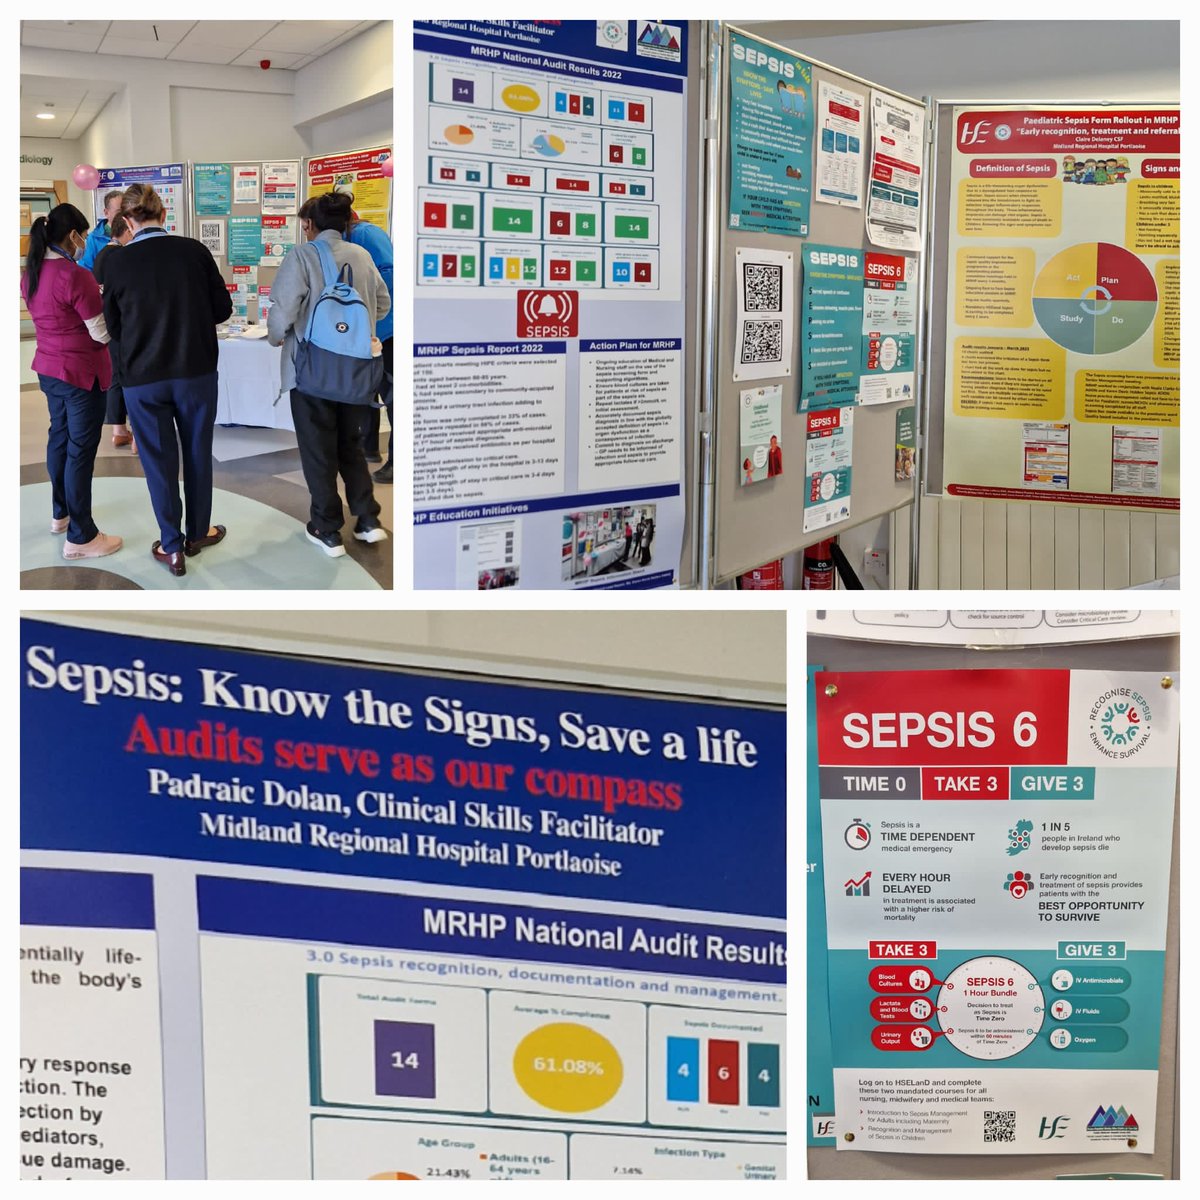 #MRHPortlaoise are running events this week to highlight the signs and symptoms of sepsis and to promote the use of the Sepsis 6 Form amongst staff. Visit hseland.ie to complete the mandatory HSELanD training for all healthcare workers today #RecogniseSepsis